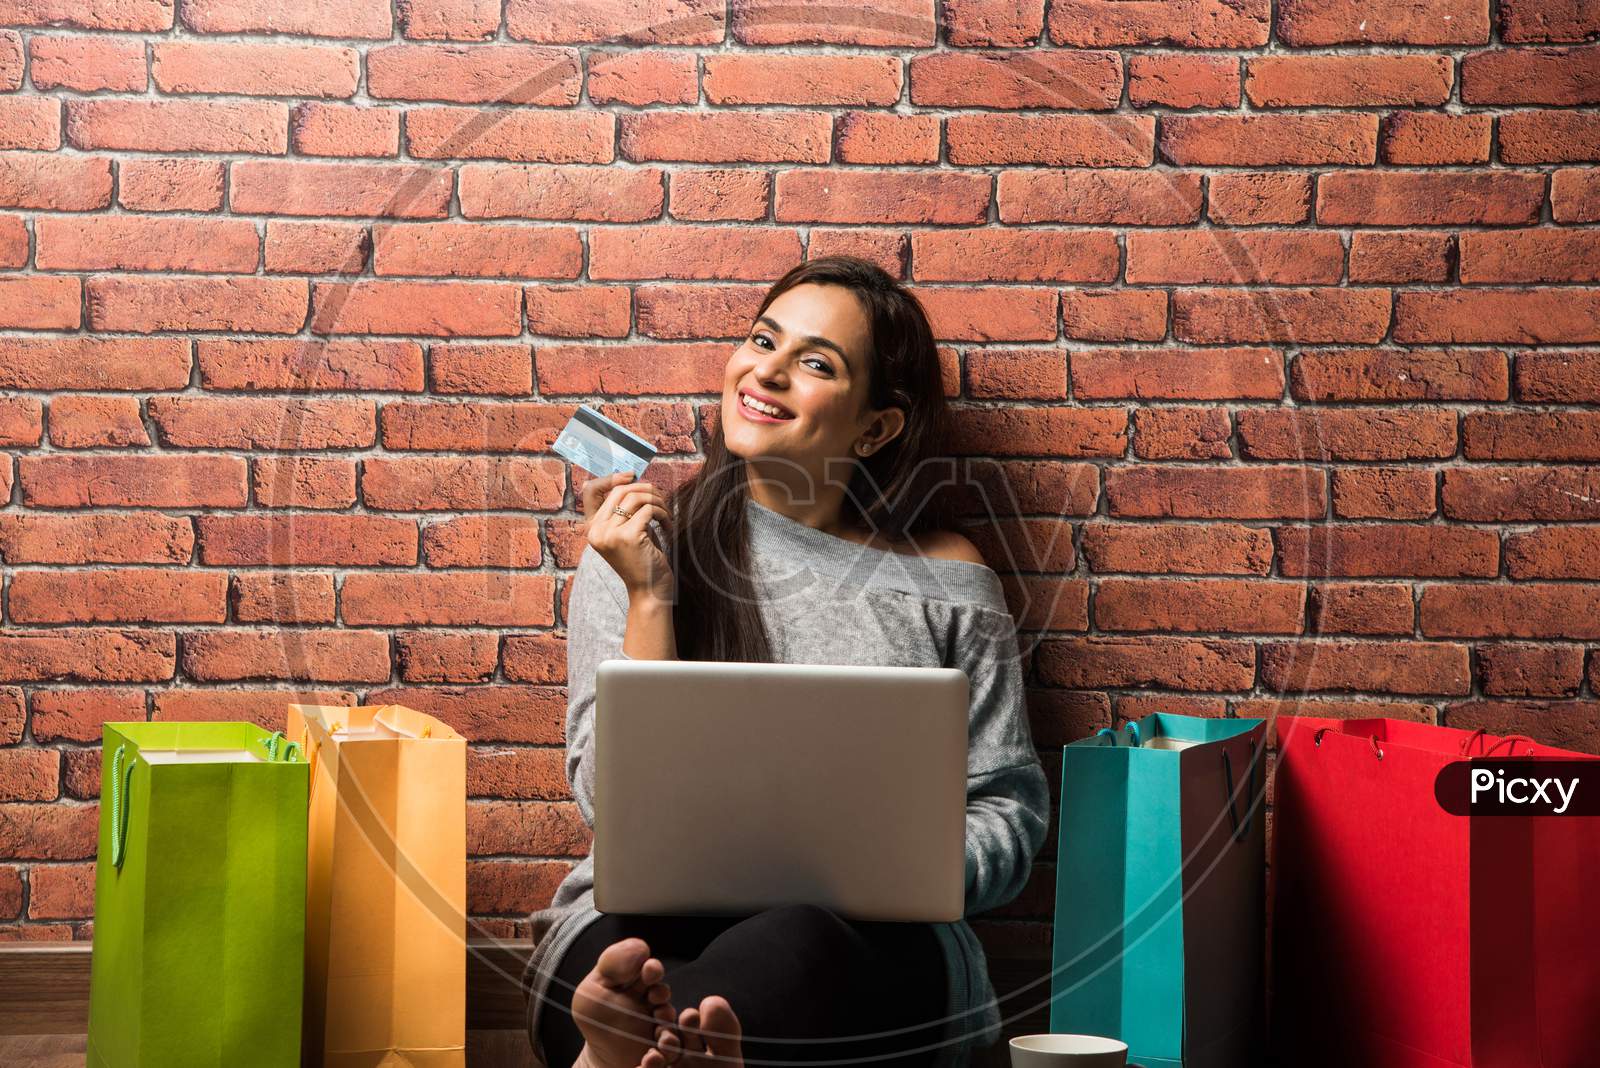 Indian girl shopping with debit / Credit card and laptop while sitting over wooden floor against red brick wall